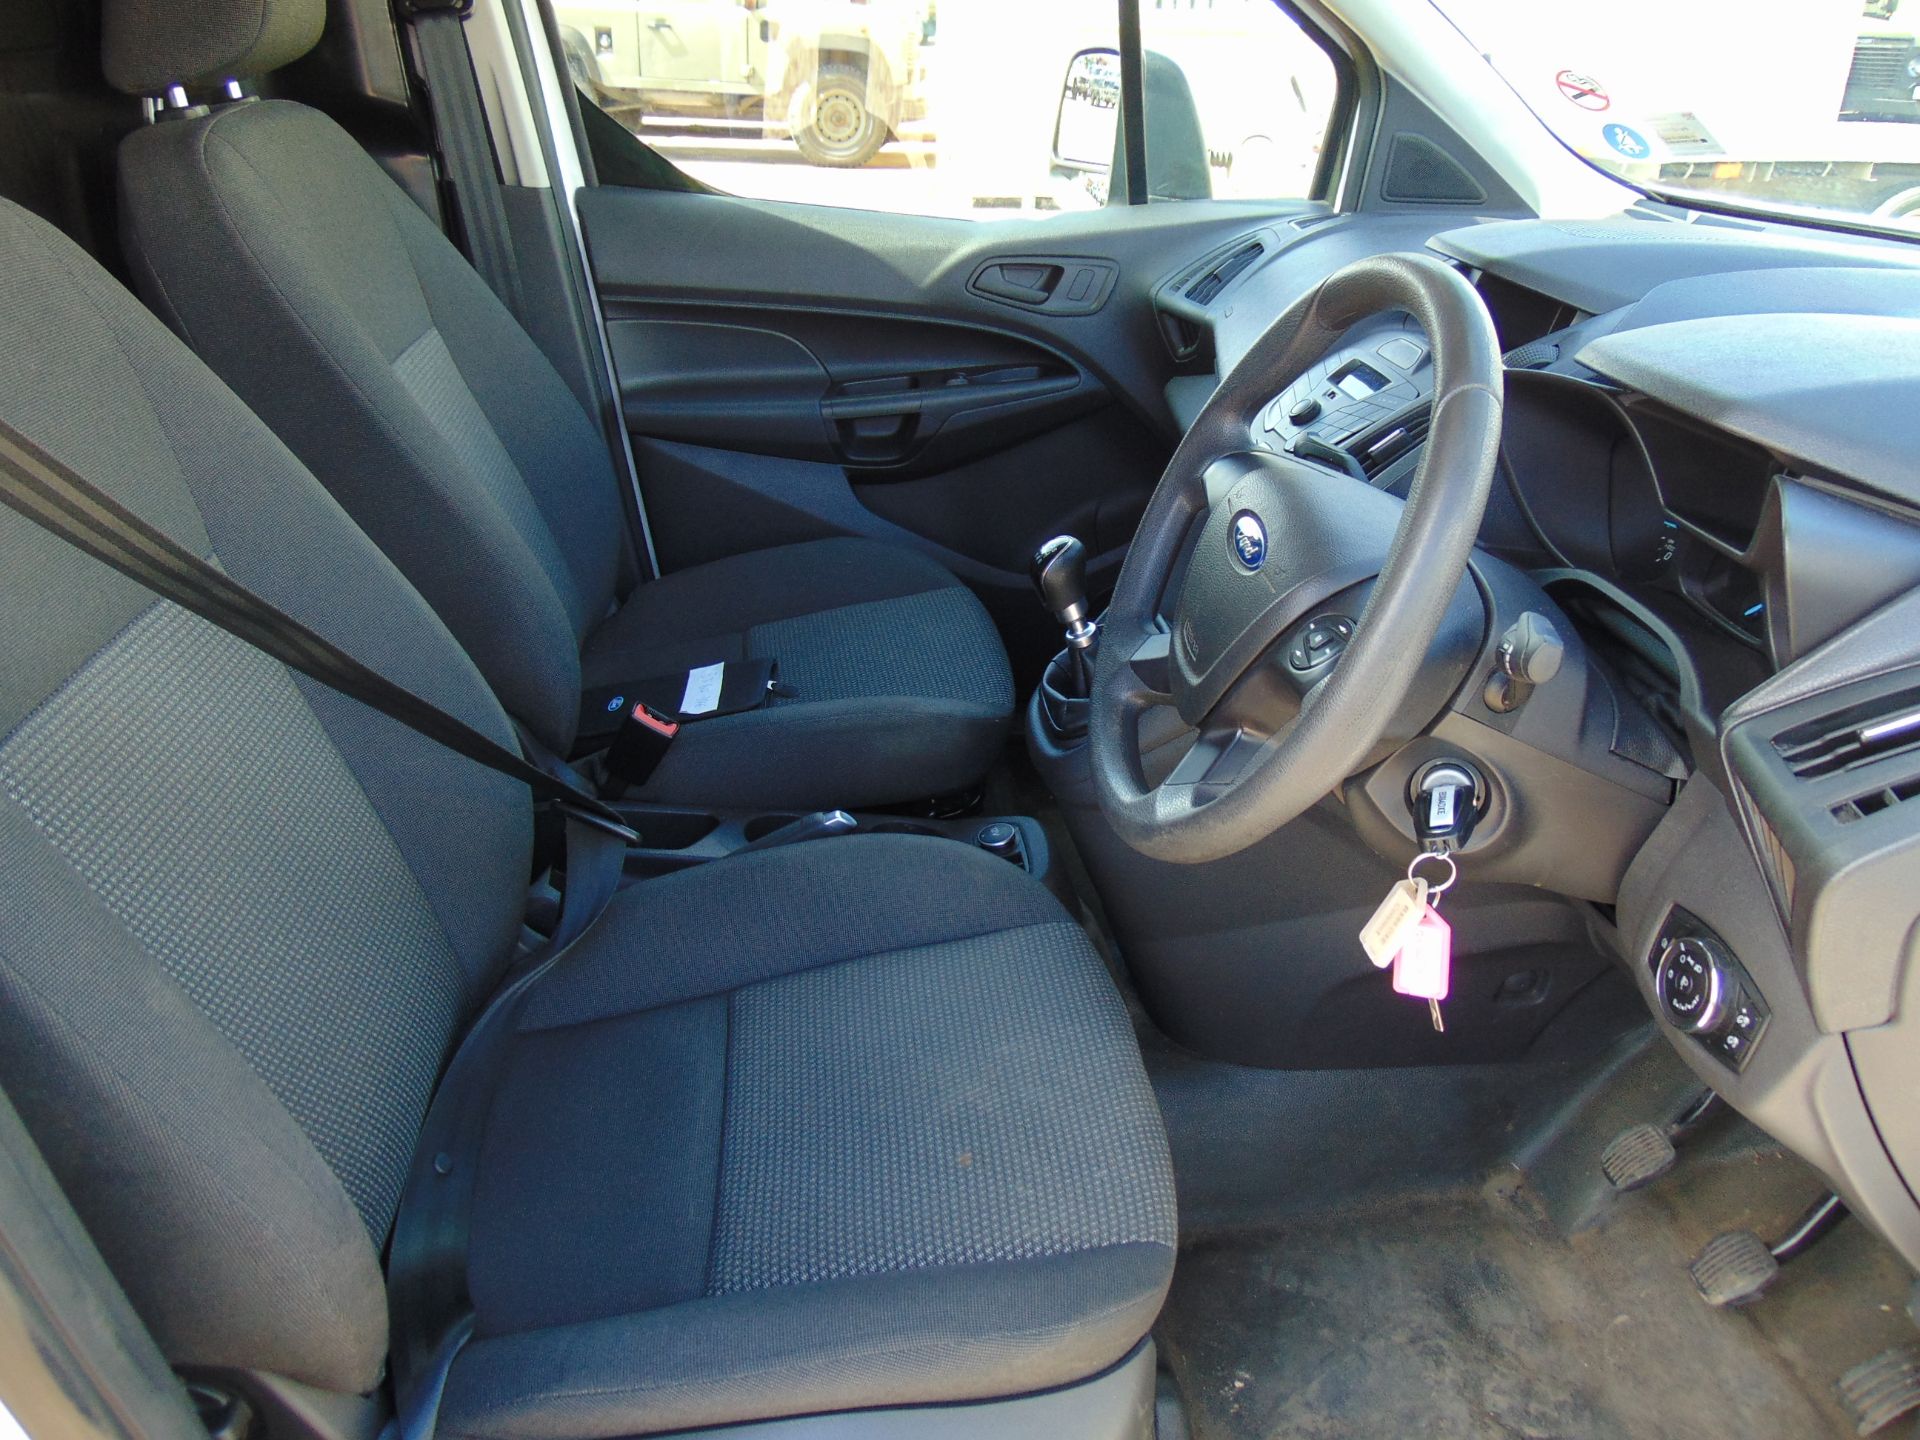 2014 Ford Transit Connect 240 1.6TDCi Panel Van - Image 17 of 18